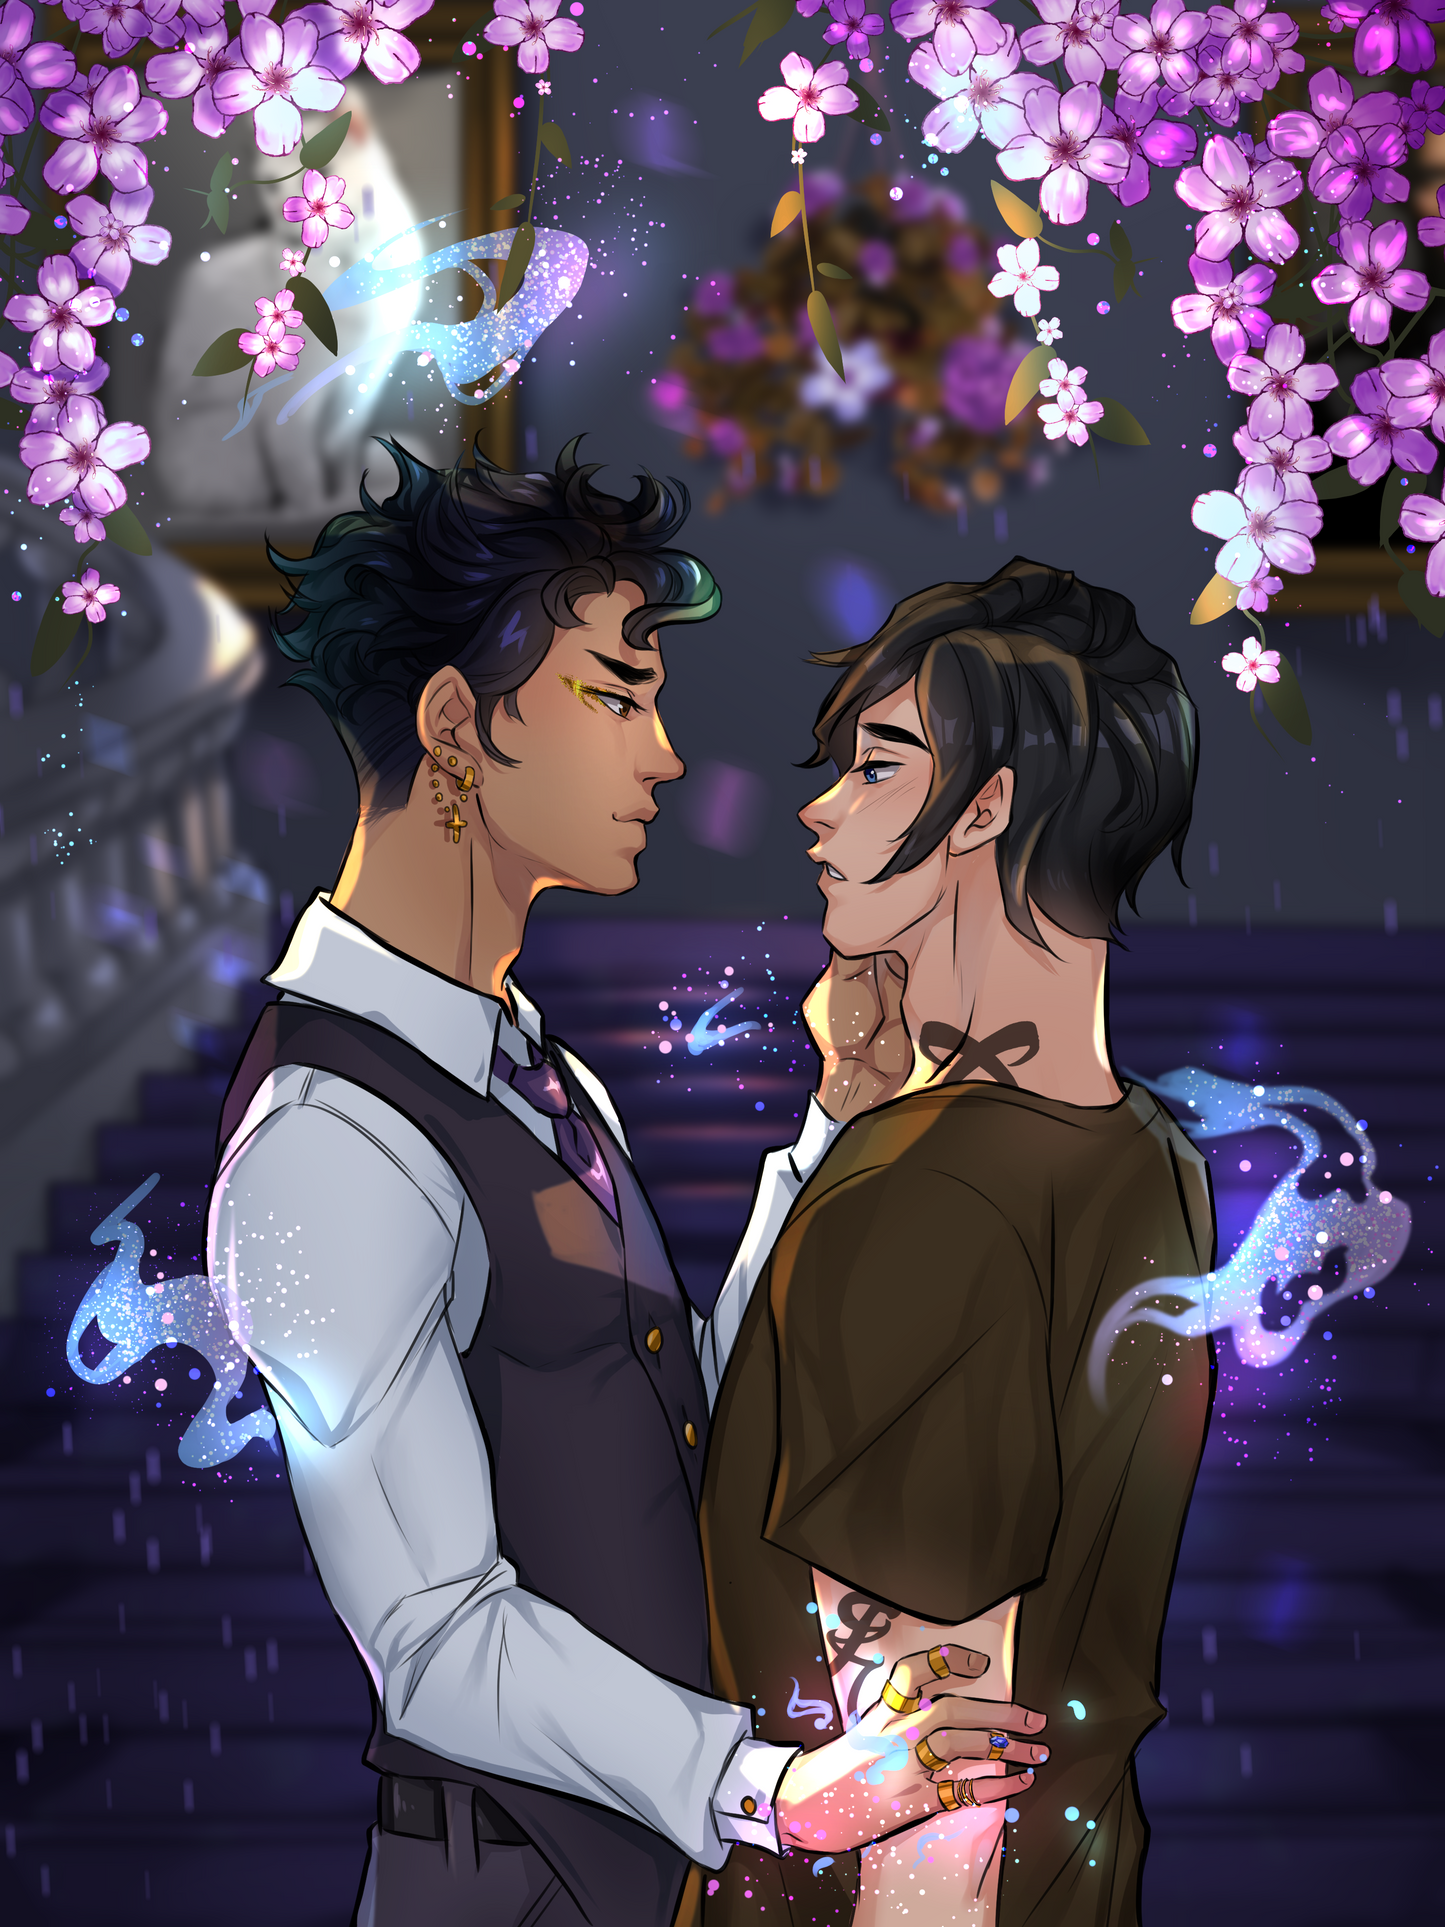 5x7 Malec Art Print Magnus Bane and Alec Lightwood Book Couple Warlock Shadowhunters Reader Gift Fan Art For Book Lover Cassandra Clare